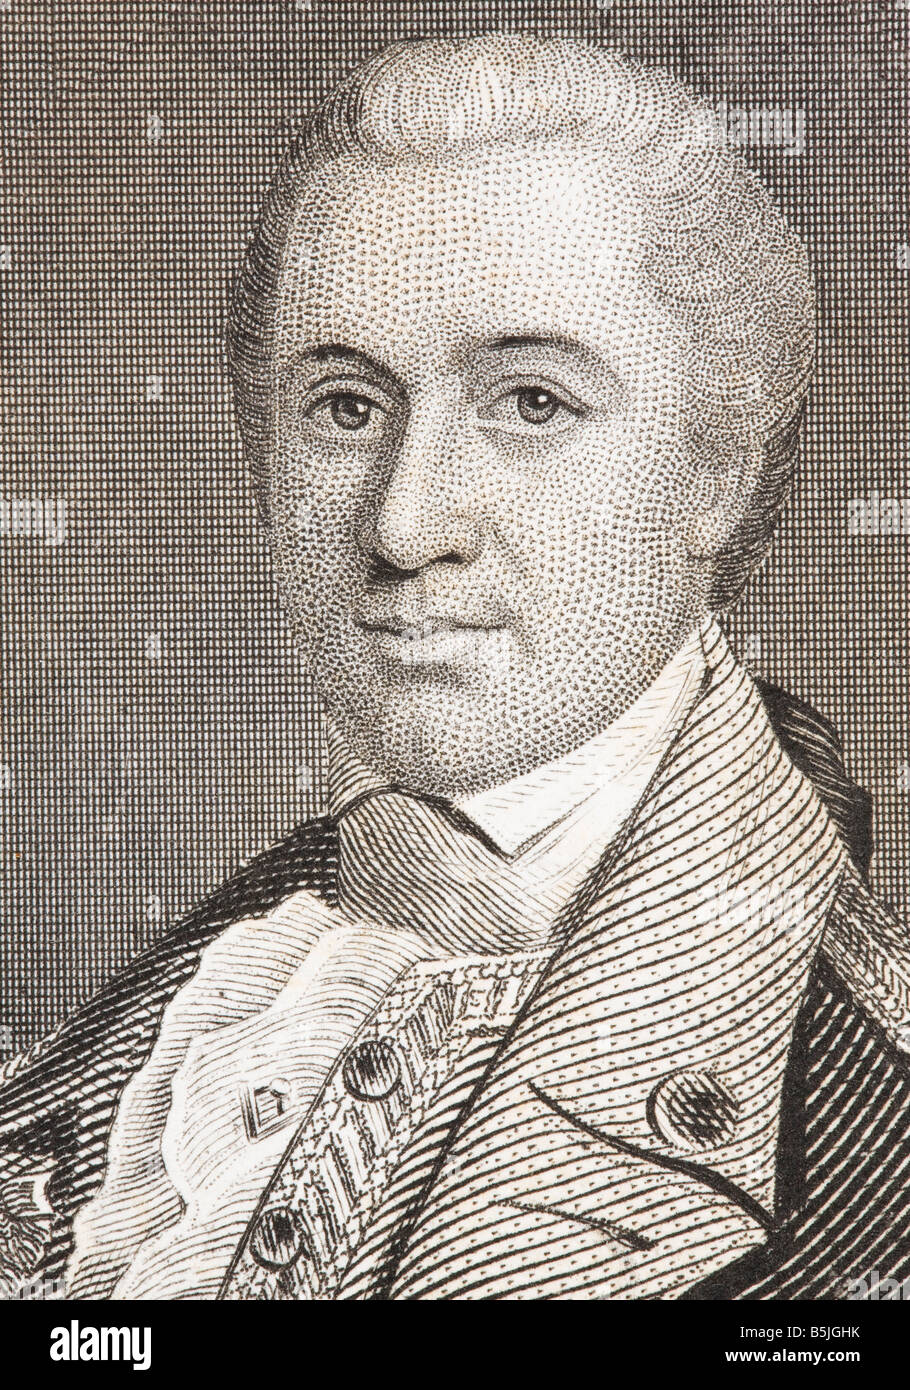 Otho Holland Williams, 1749 - 1794. Brigadier general during the American Revolutionary War. Stock Photo